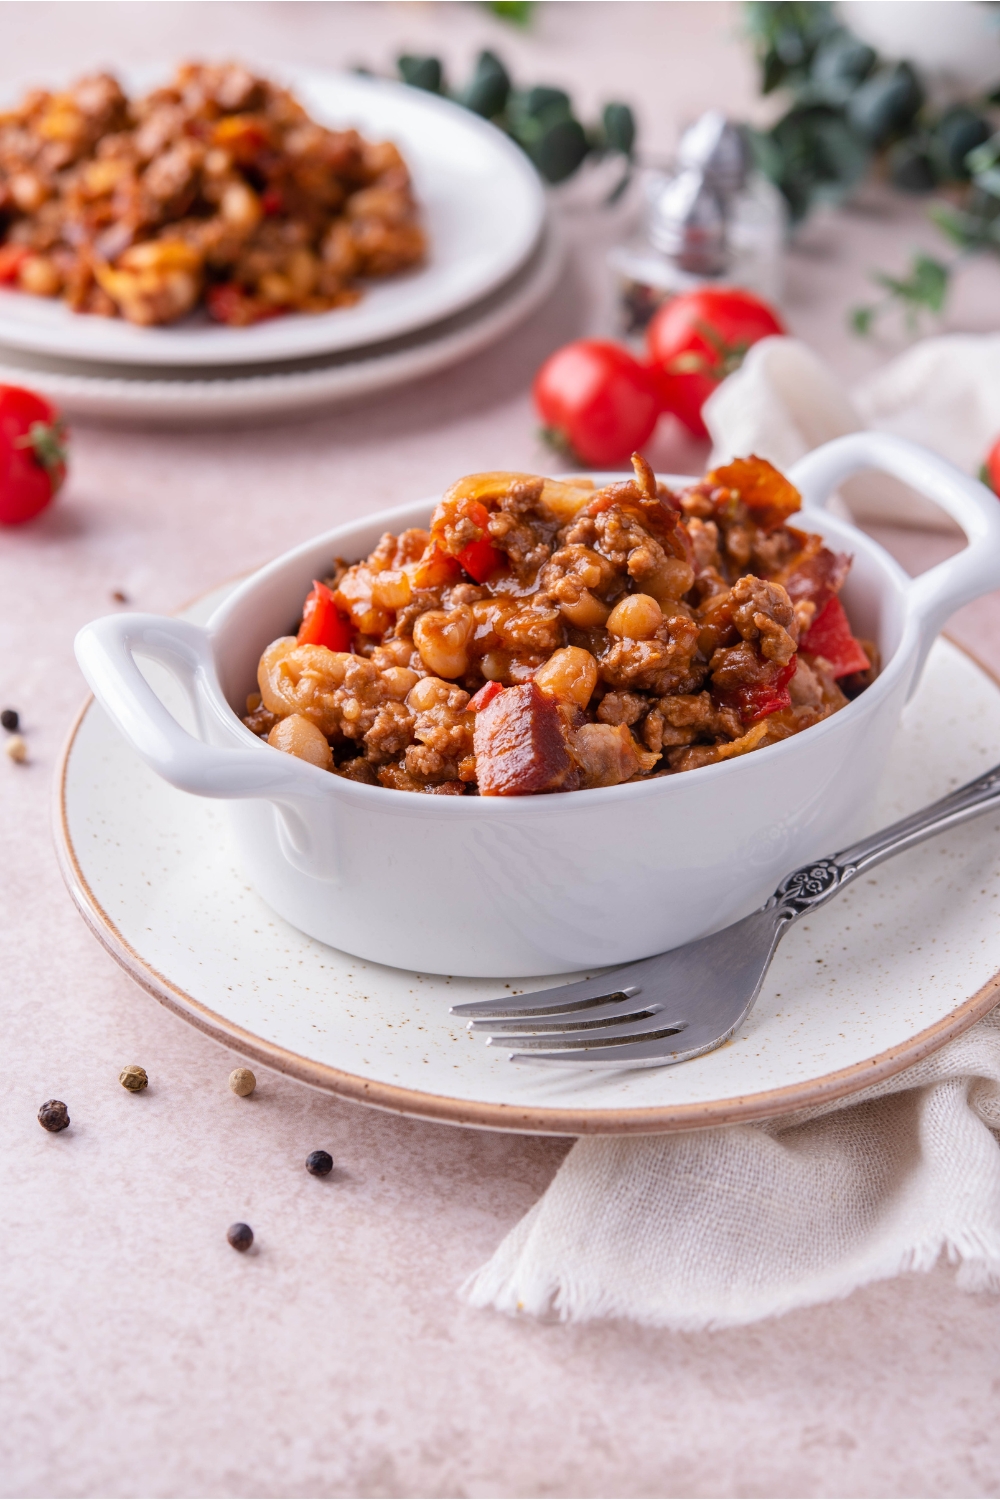 Southern baked beans with ground beef and bacon in a white baking dish atop a white plate. There is a fork on the plate and in the background is a serving of baked beans with ground beef on a plate.